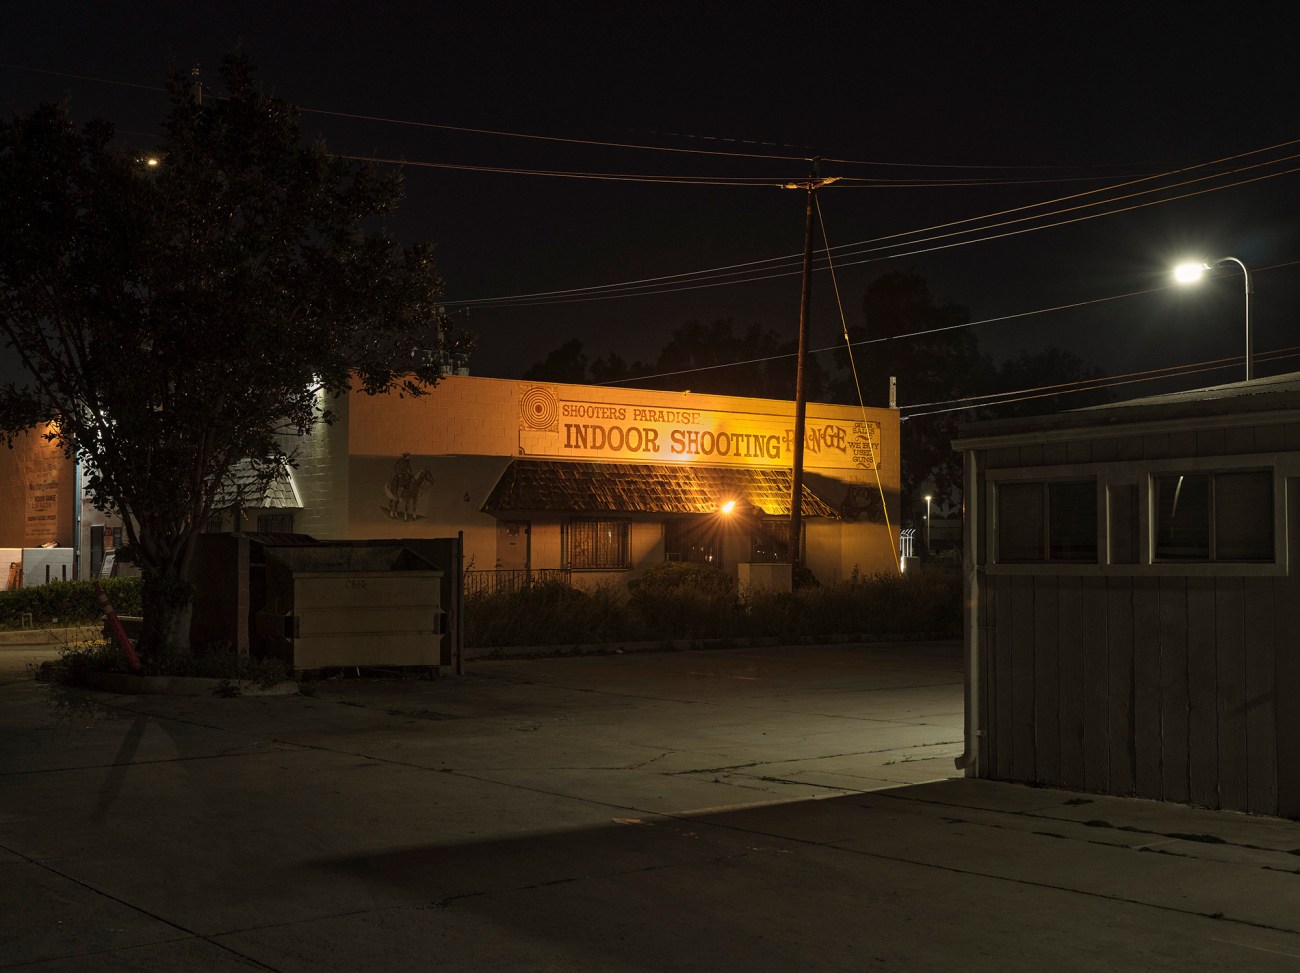 Night time image of the outside of a shooting range.